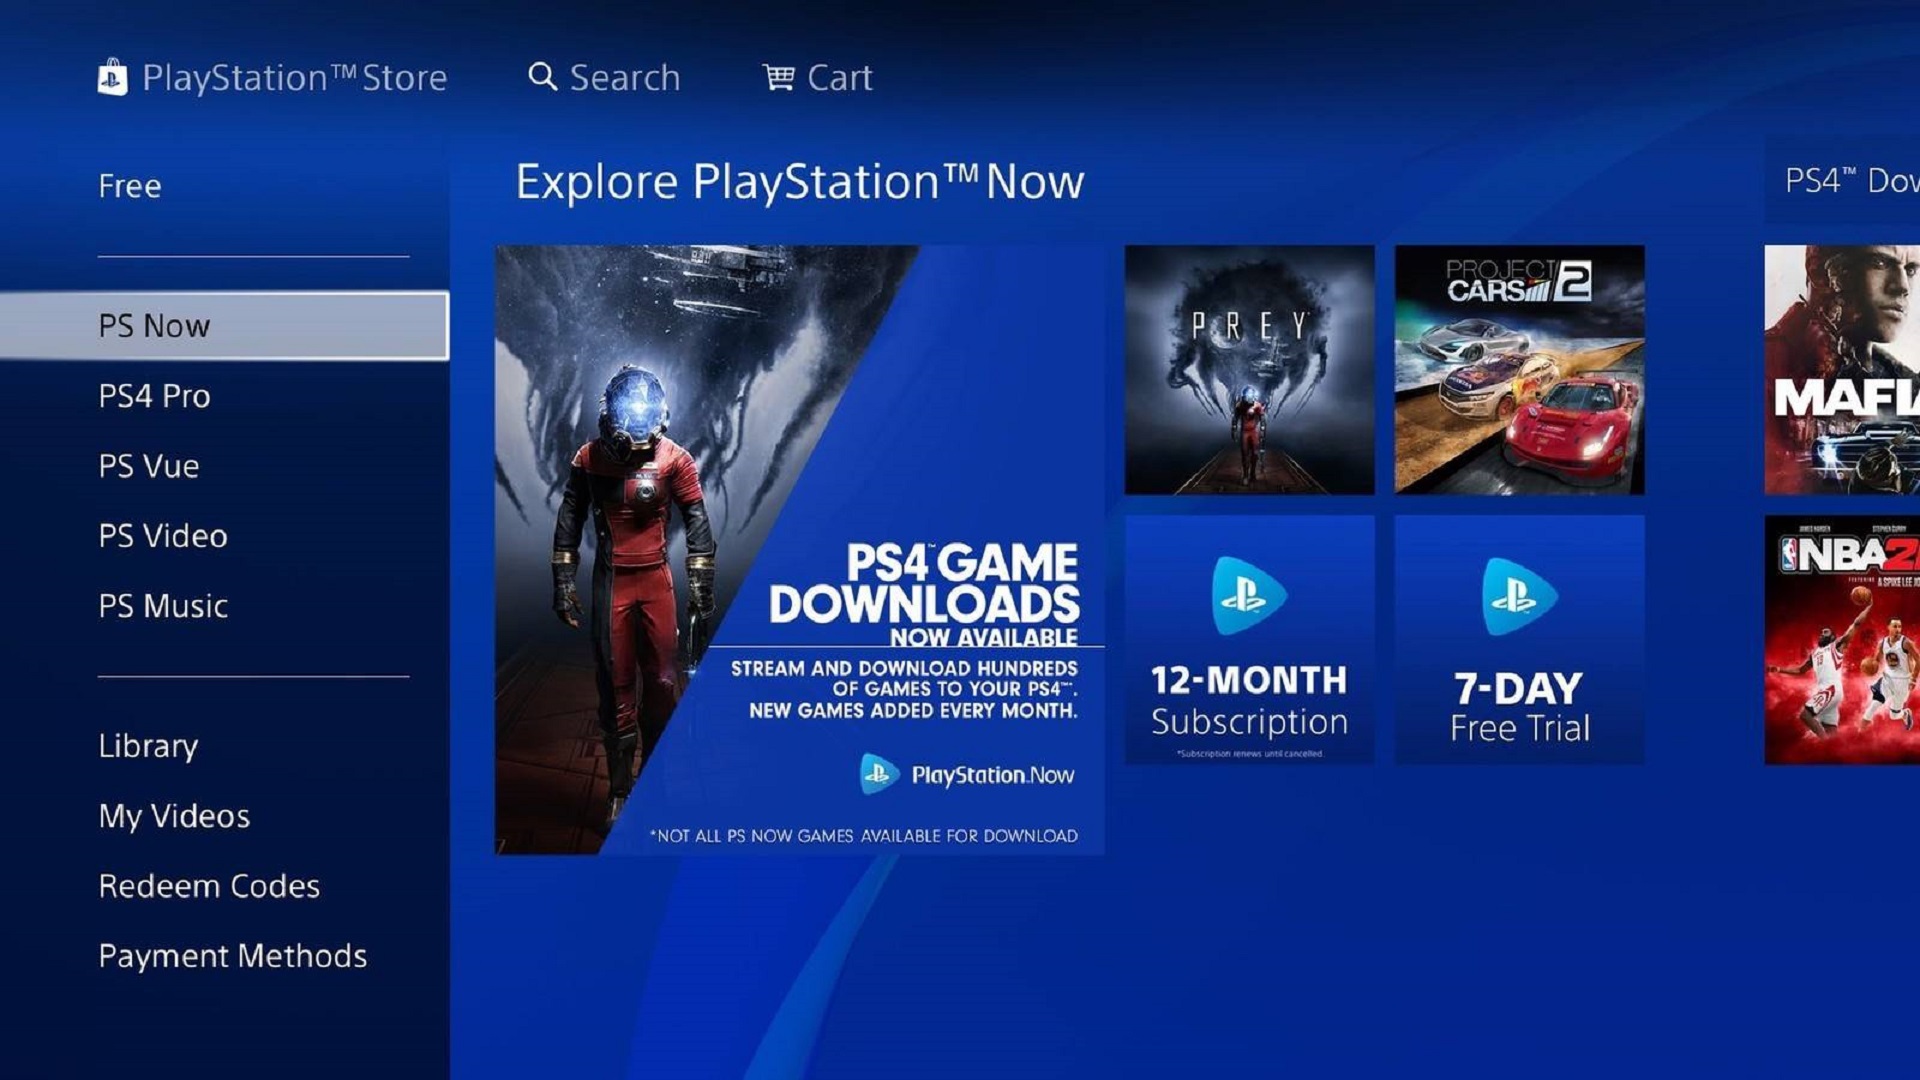 Playstation now